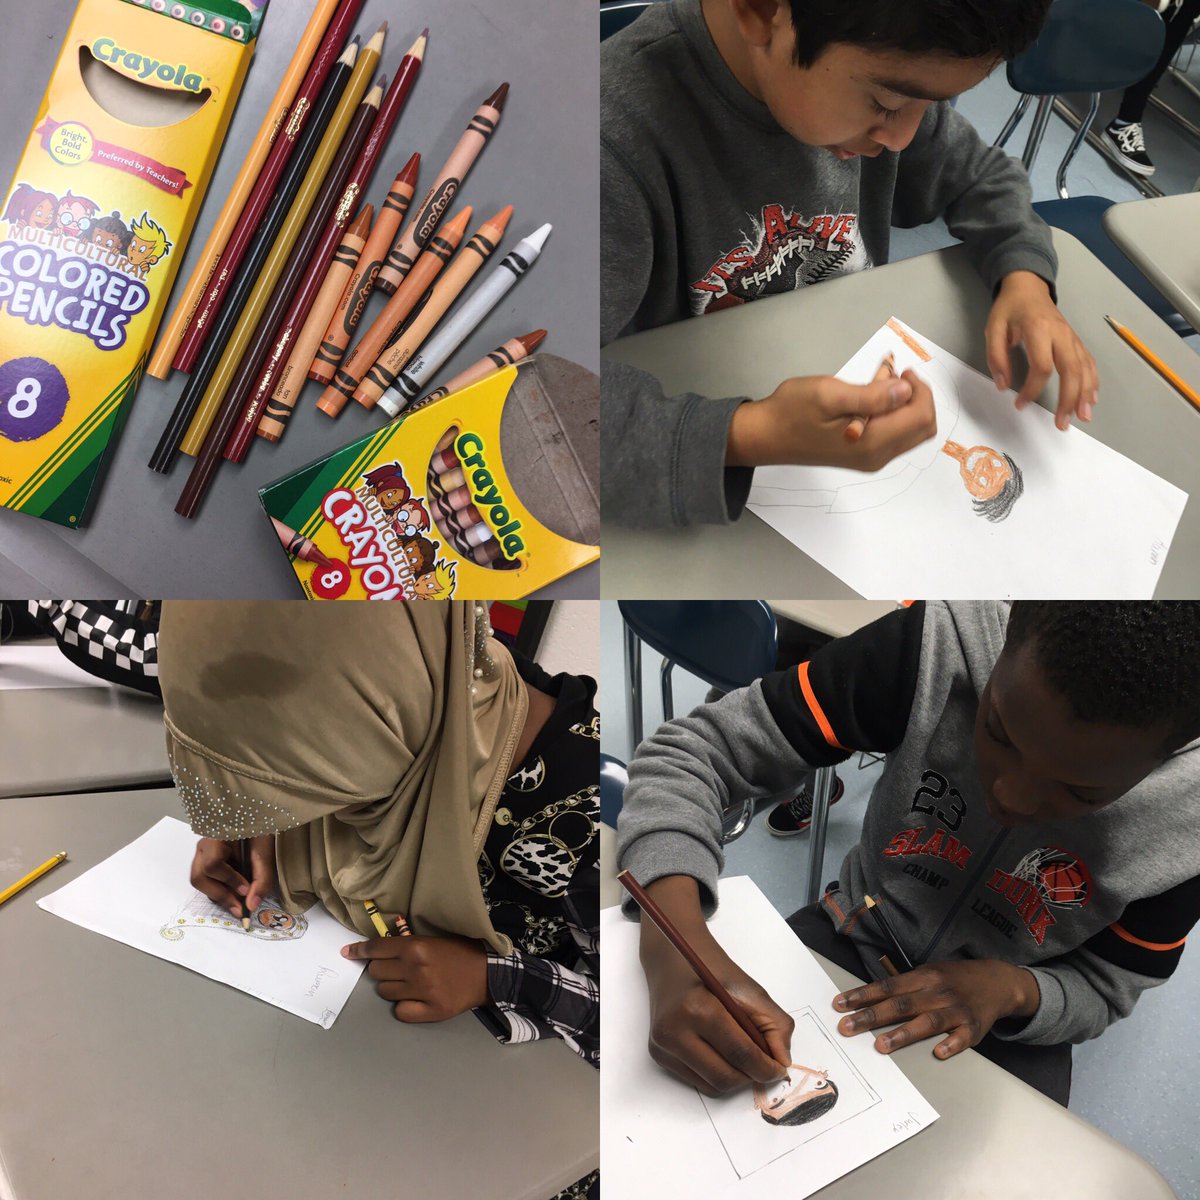 Thank you @Crayola for having #multicultural crayons and colored pencils so students can showcase their #diversity @CampErnstBlazer #ELL #ESL #Boone2020 #BooneNation @Boone_County